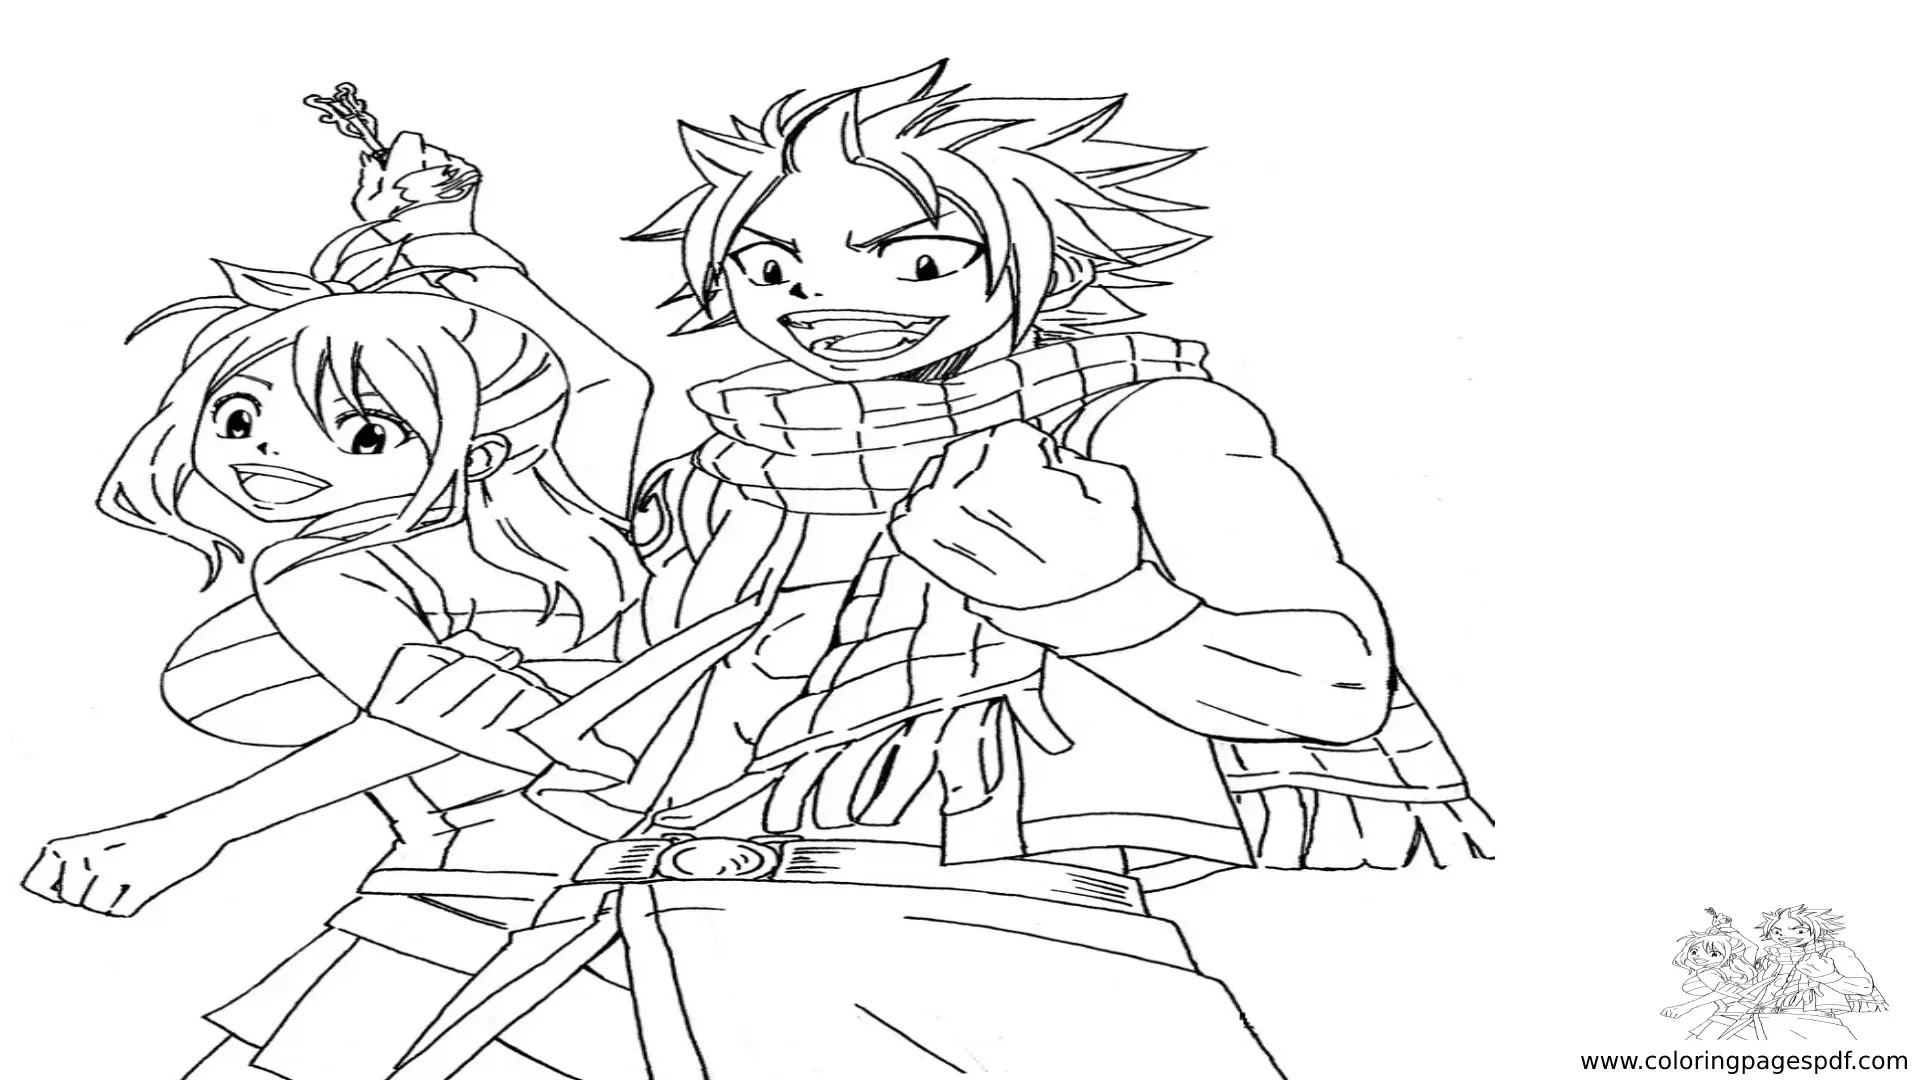 Coloring Page Of Natsu And Lucy (Fairy Tail)